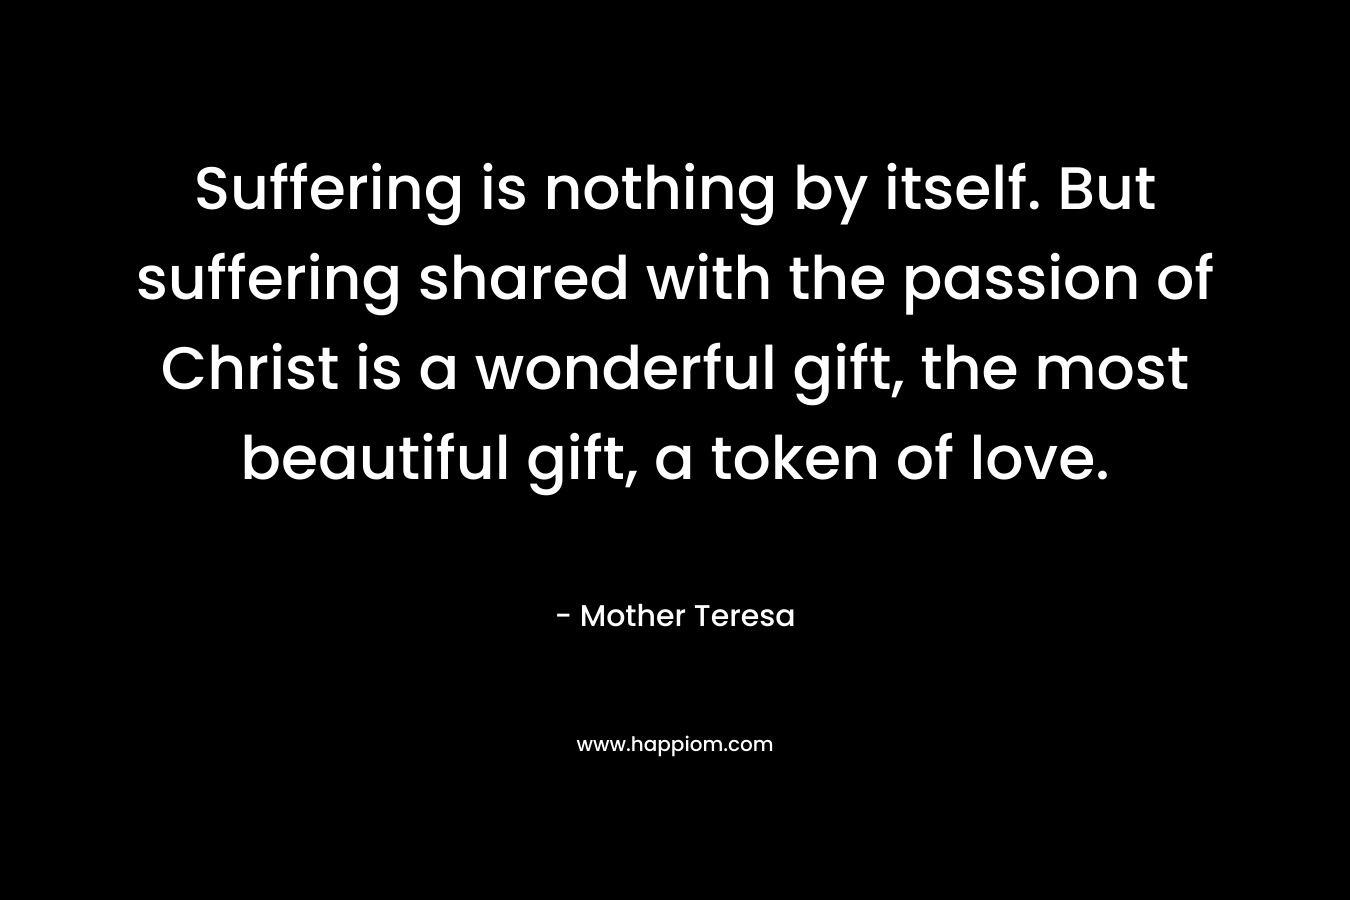 Suffering is nothing by itself. But suffering shared with the passion of Christ is a wonderful gift, the most beautiful gift, a token of love. – Mother Teresa